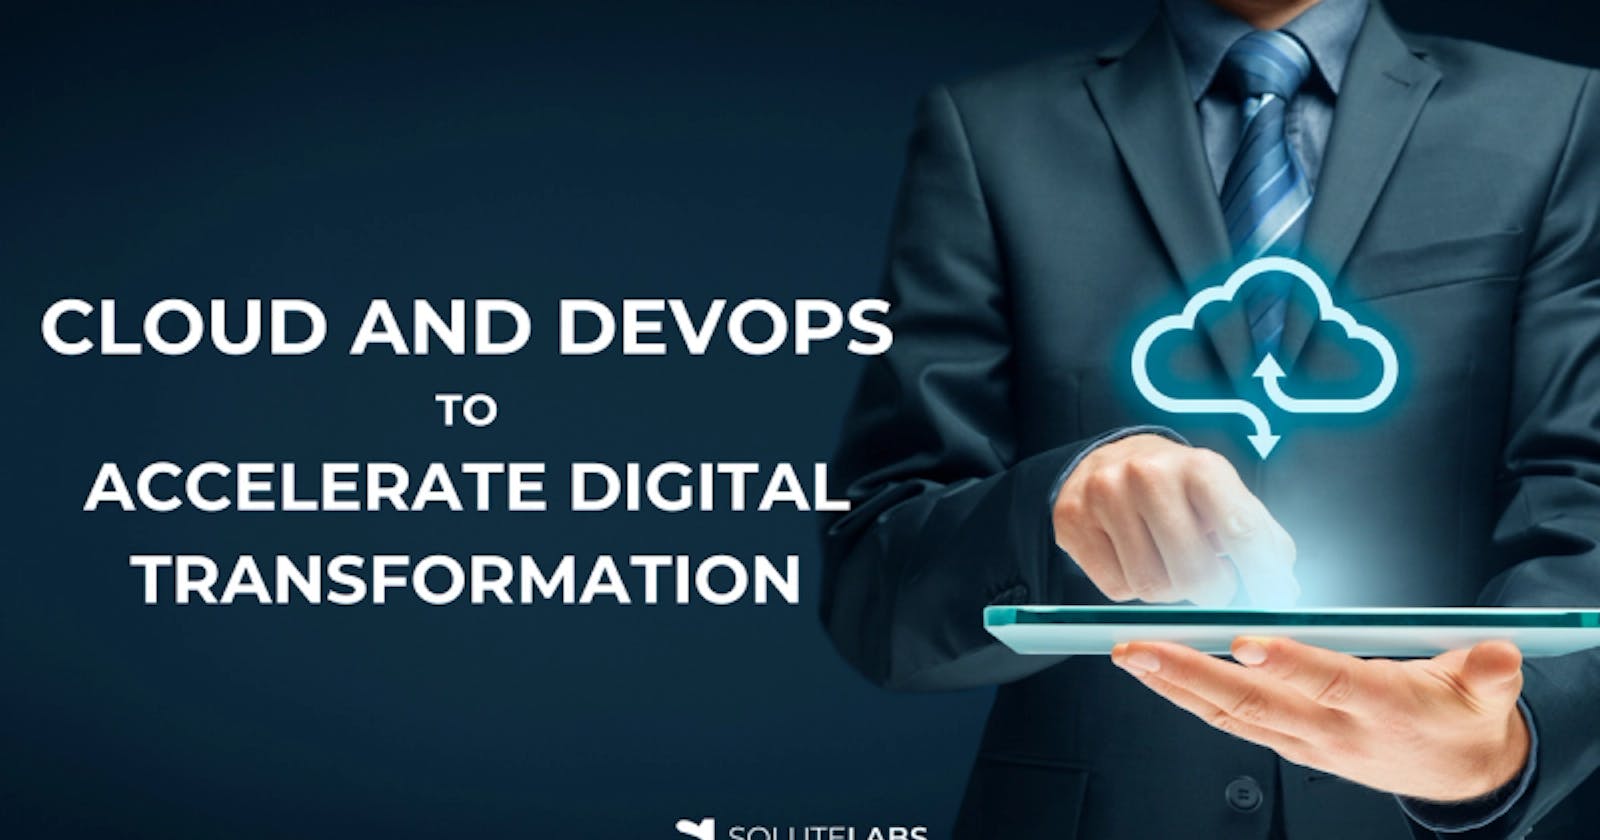 How Does Cloud and DevOps Accelerate Digital Transformation